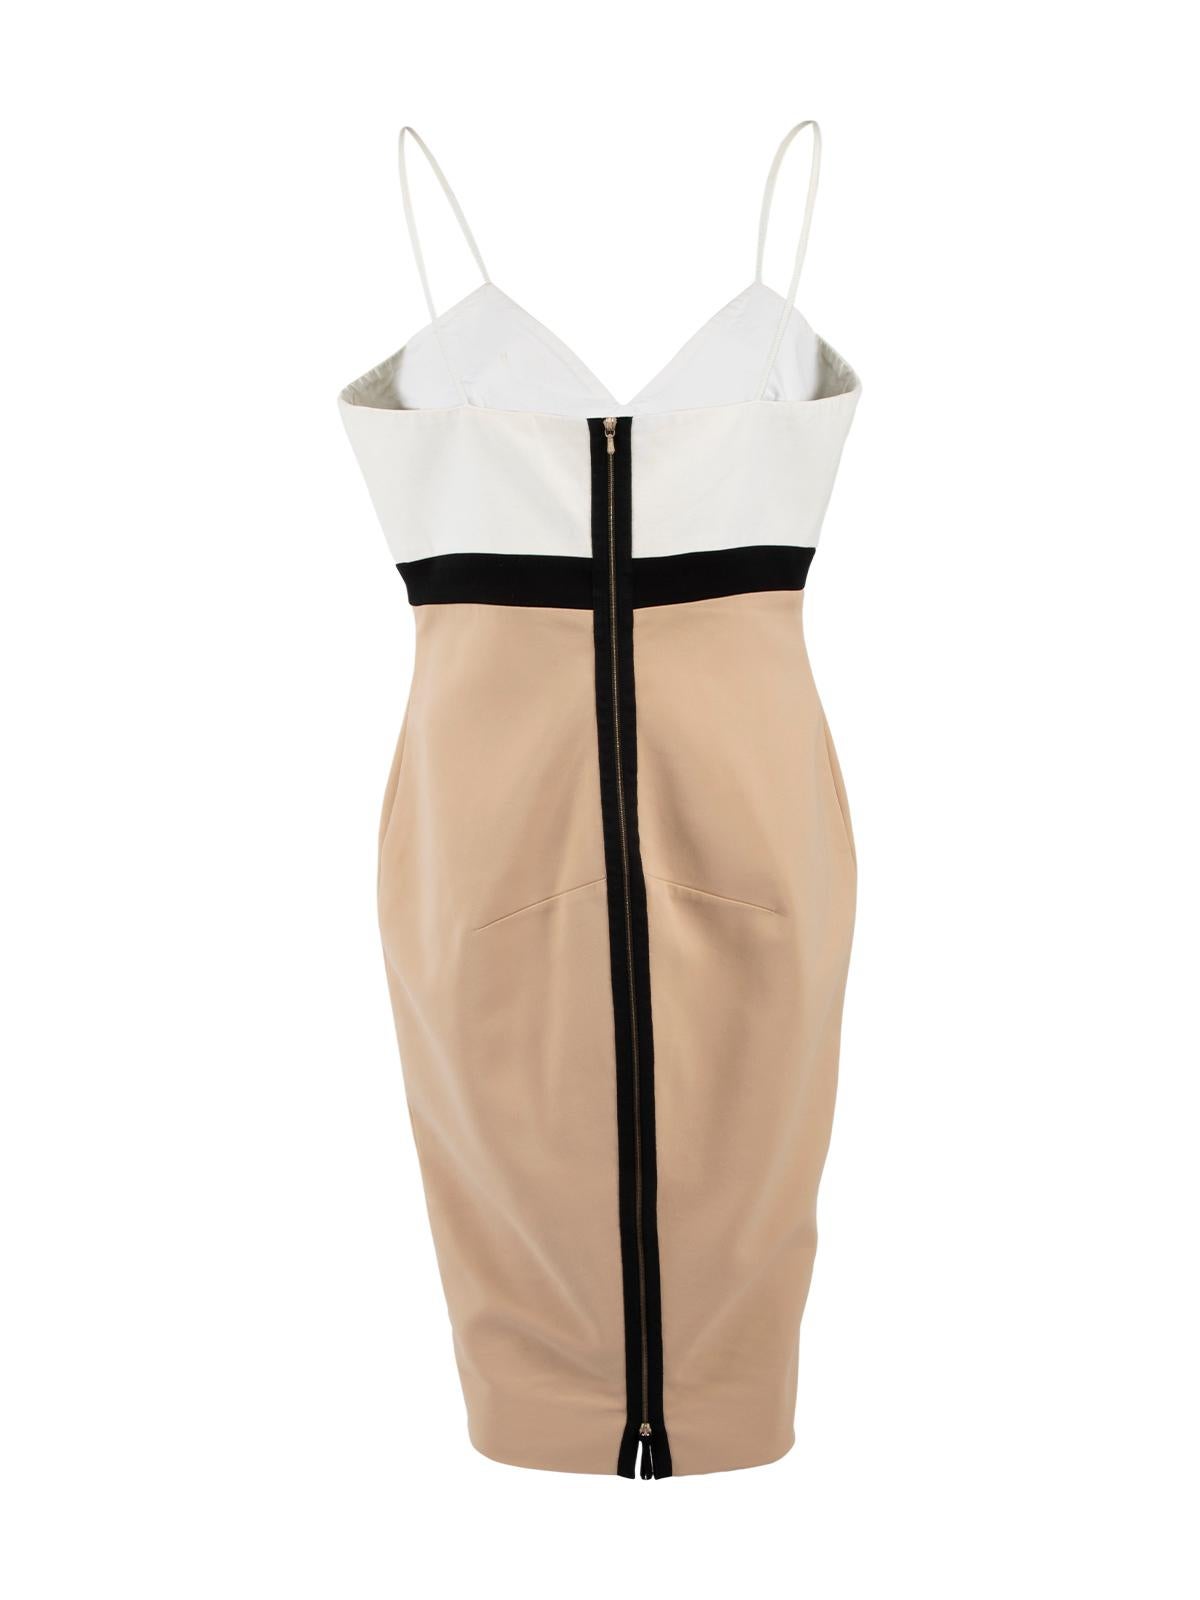 Victoria Beckham Women's Two Tone Colour Block Dress In Good Condition For Sale In London, GB